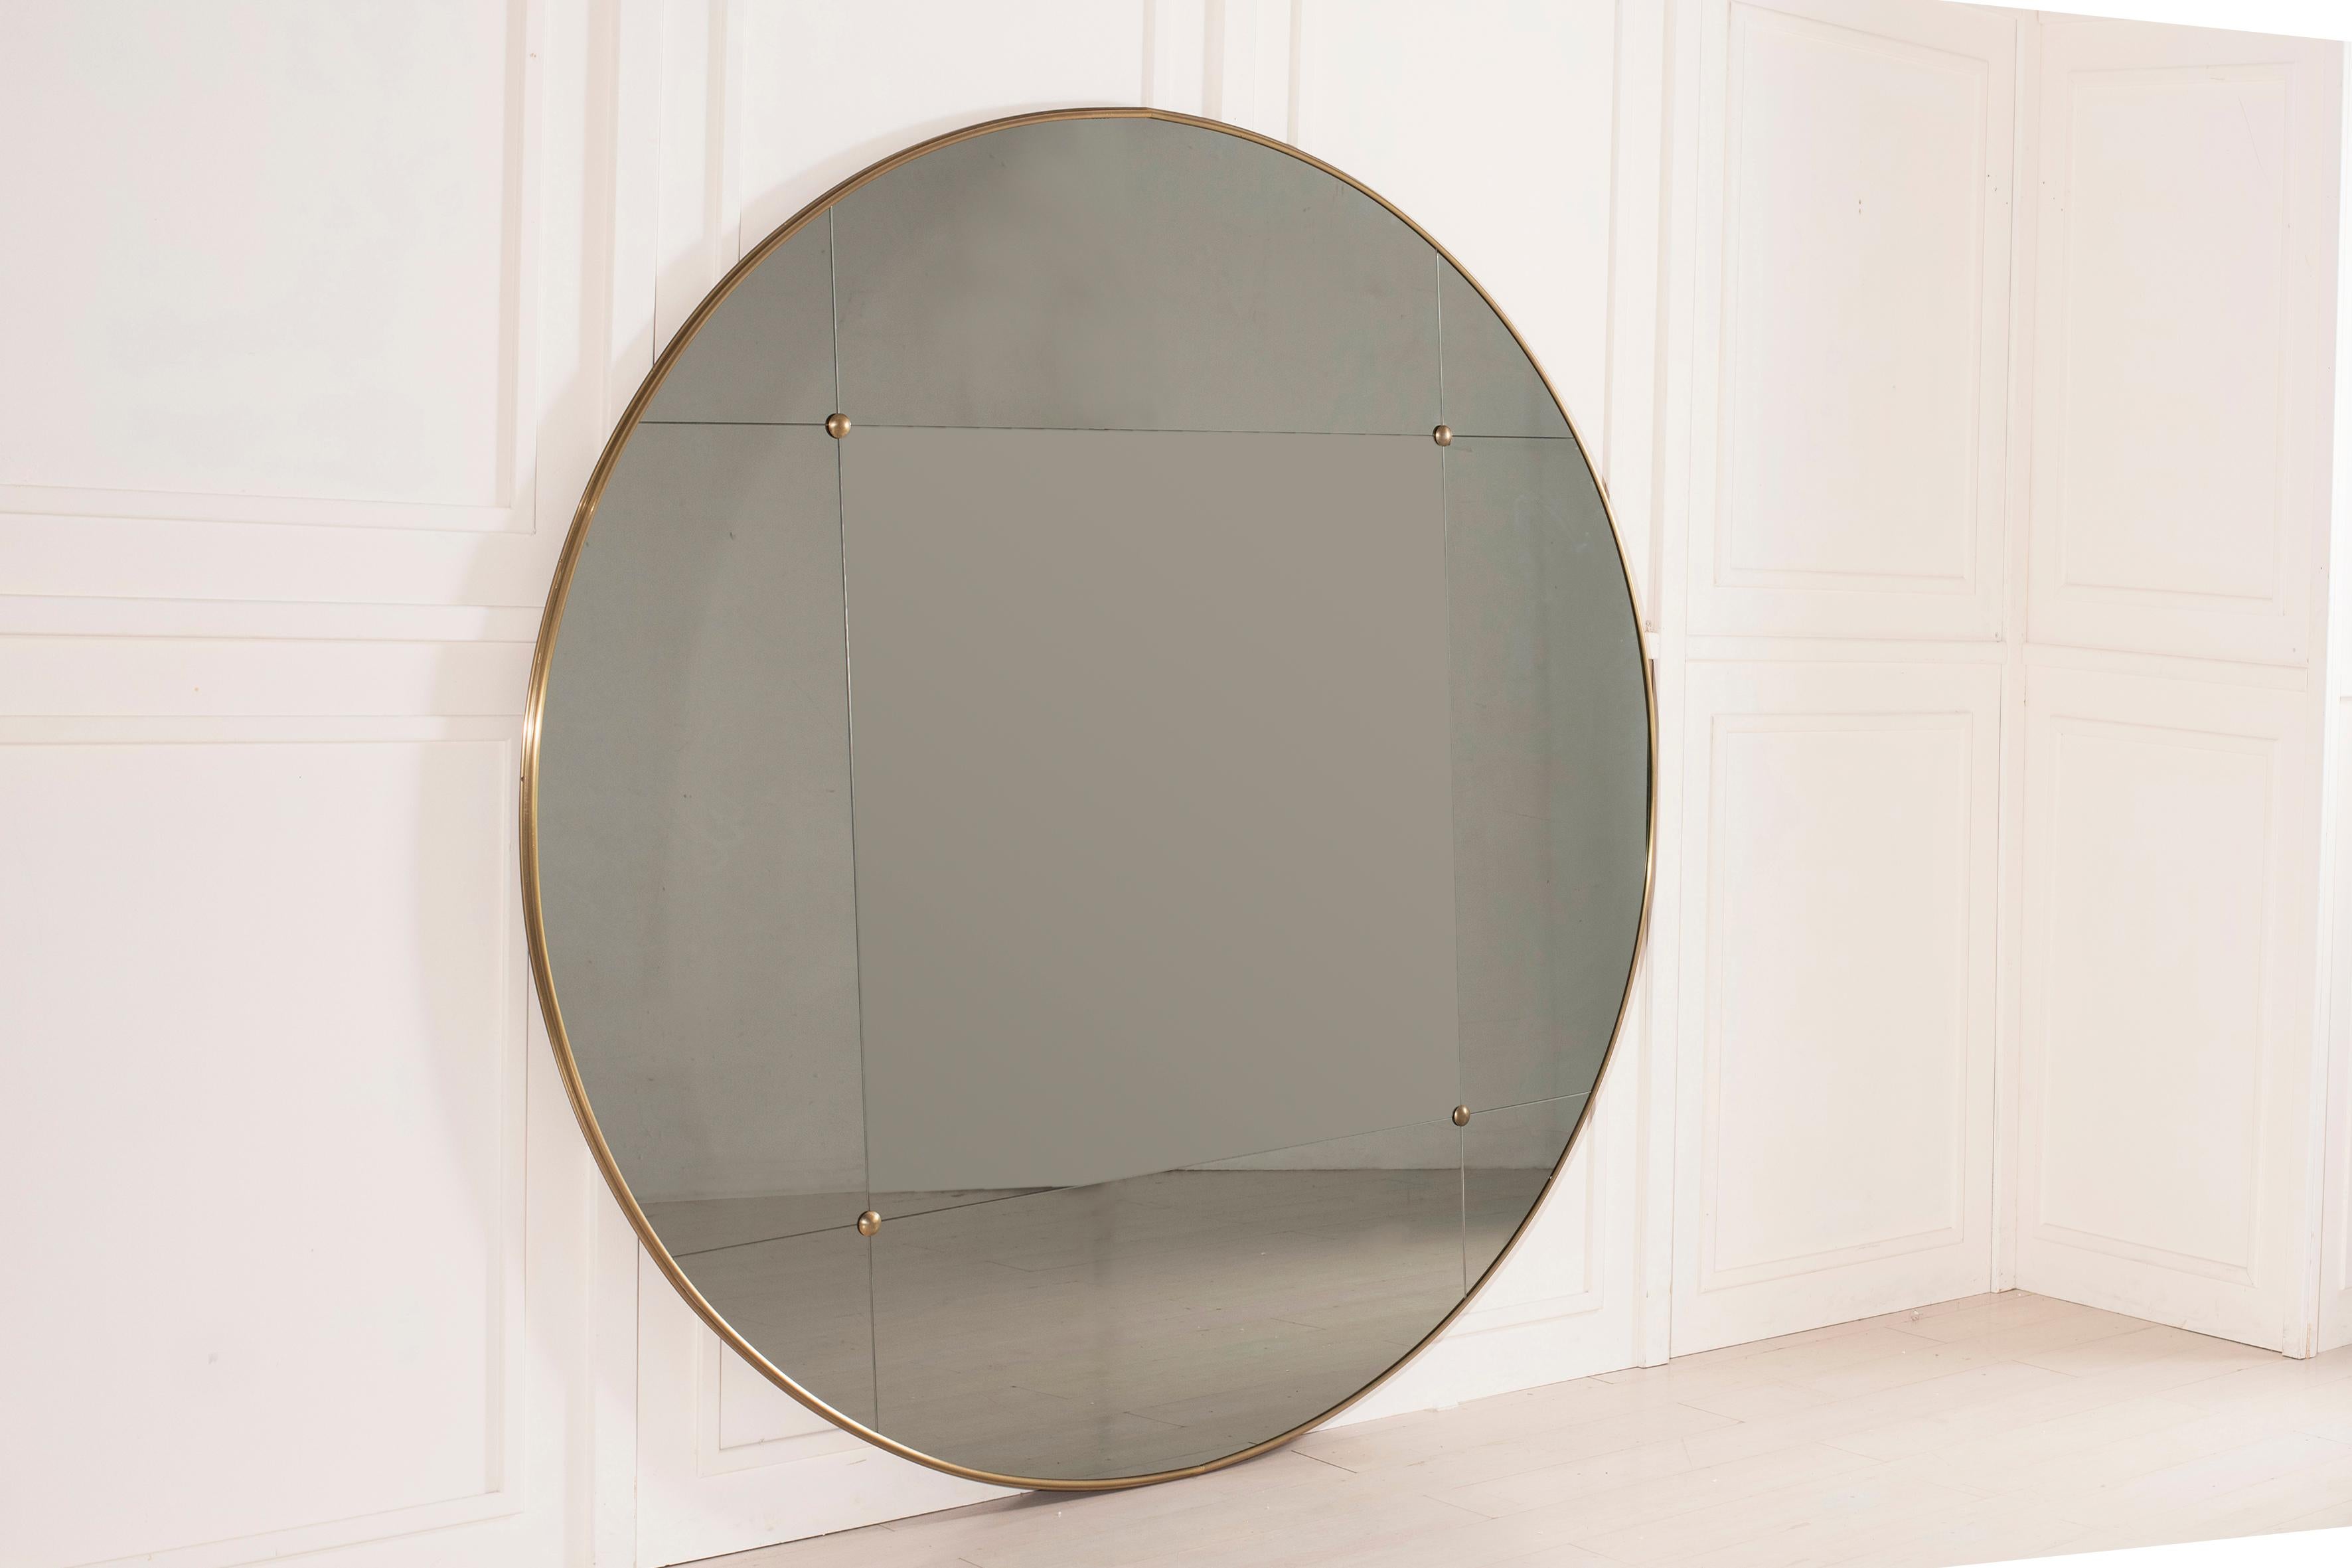 Pescetta presents its collection of contemporary customizable mirrors.

With brass frame, window pane look and brass studs these mirrors replicate the idea of early 20th century Art Deco style mirrors.
They suit both modern spaces which need a